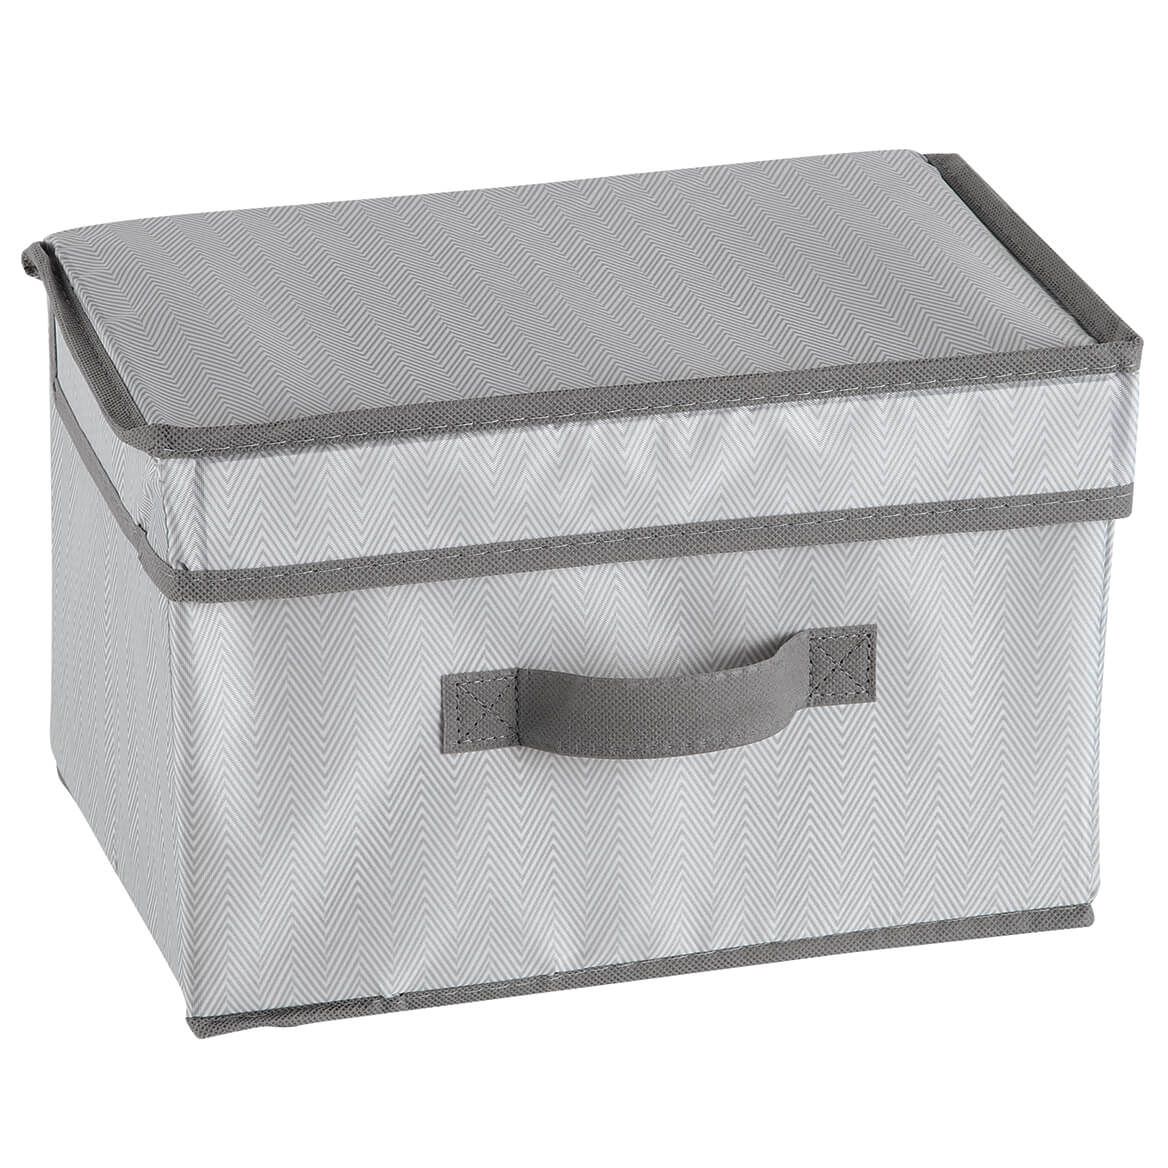 Collapsible Storage Cube with Lid by OakRidge™ + '-' + 376864